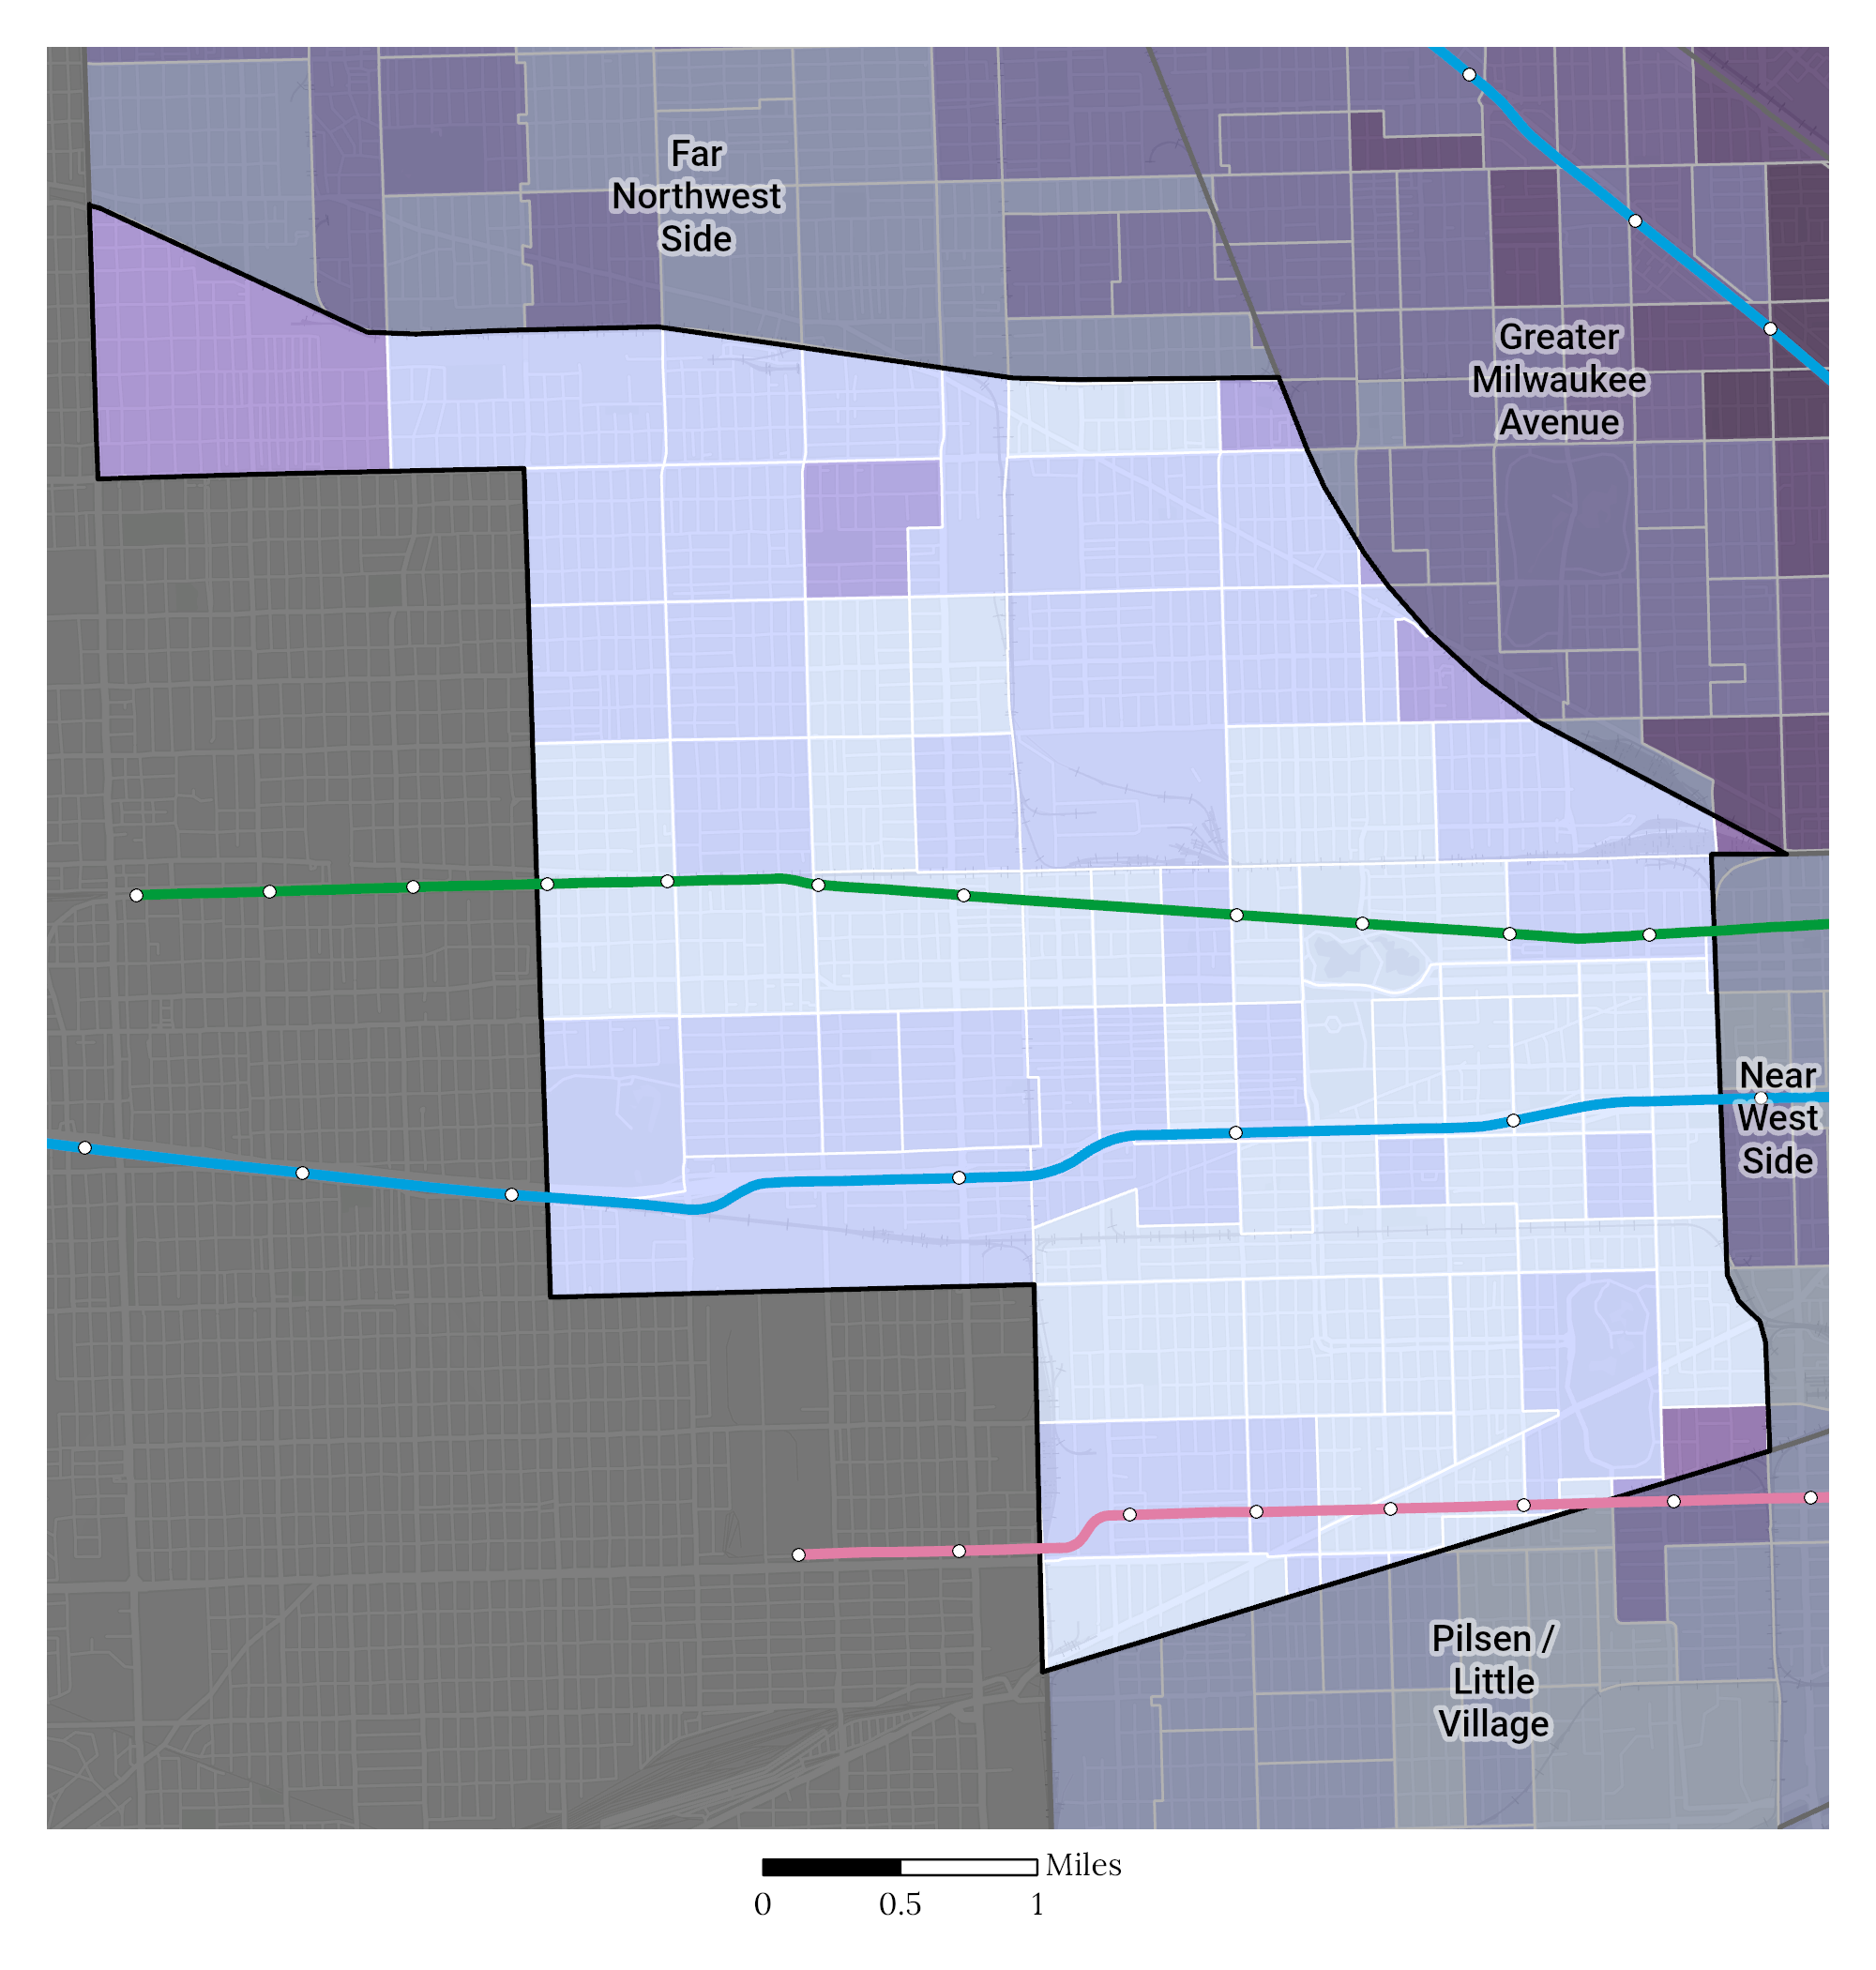 Median Household Income map of West Side